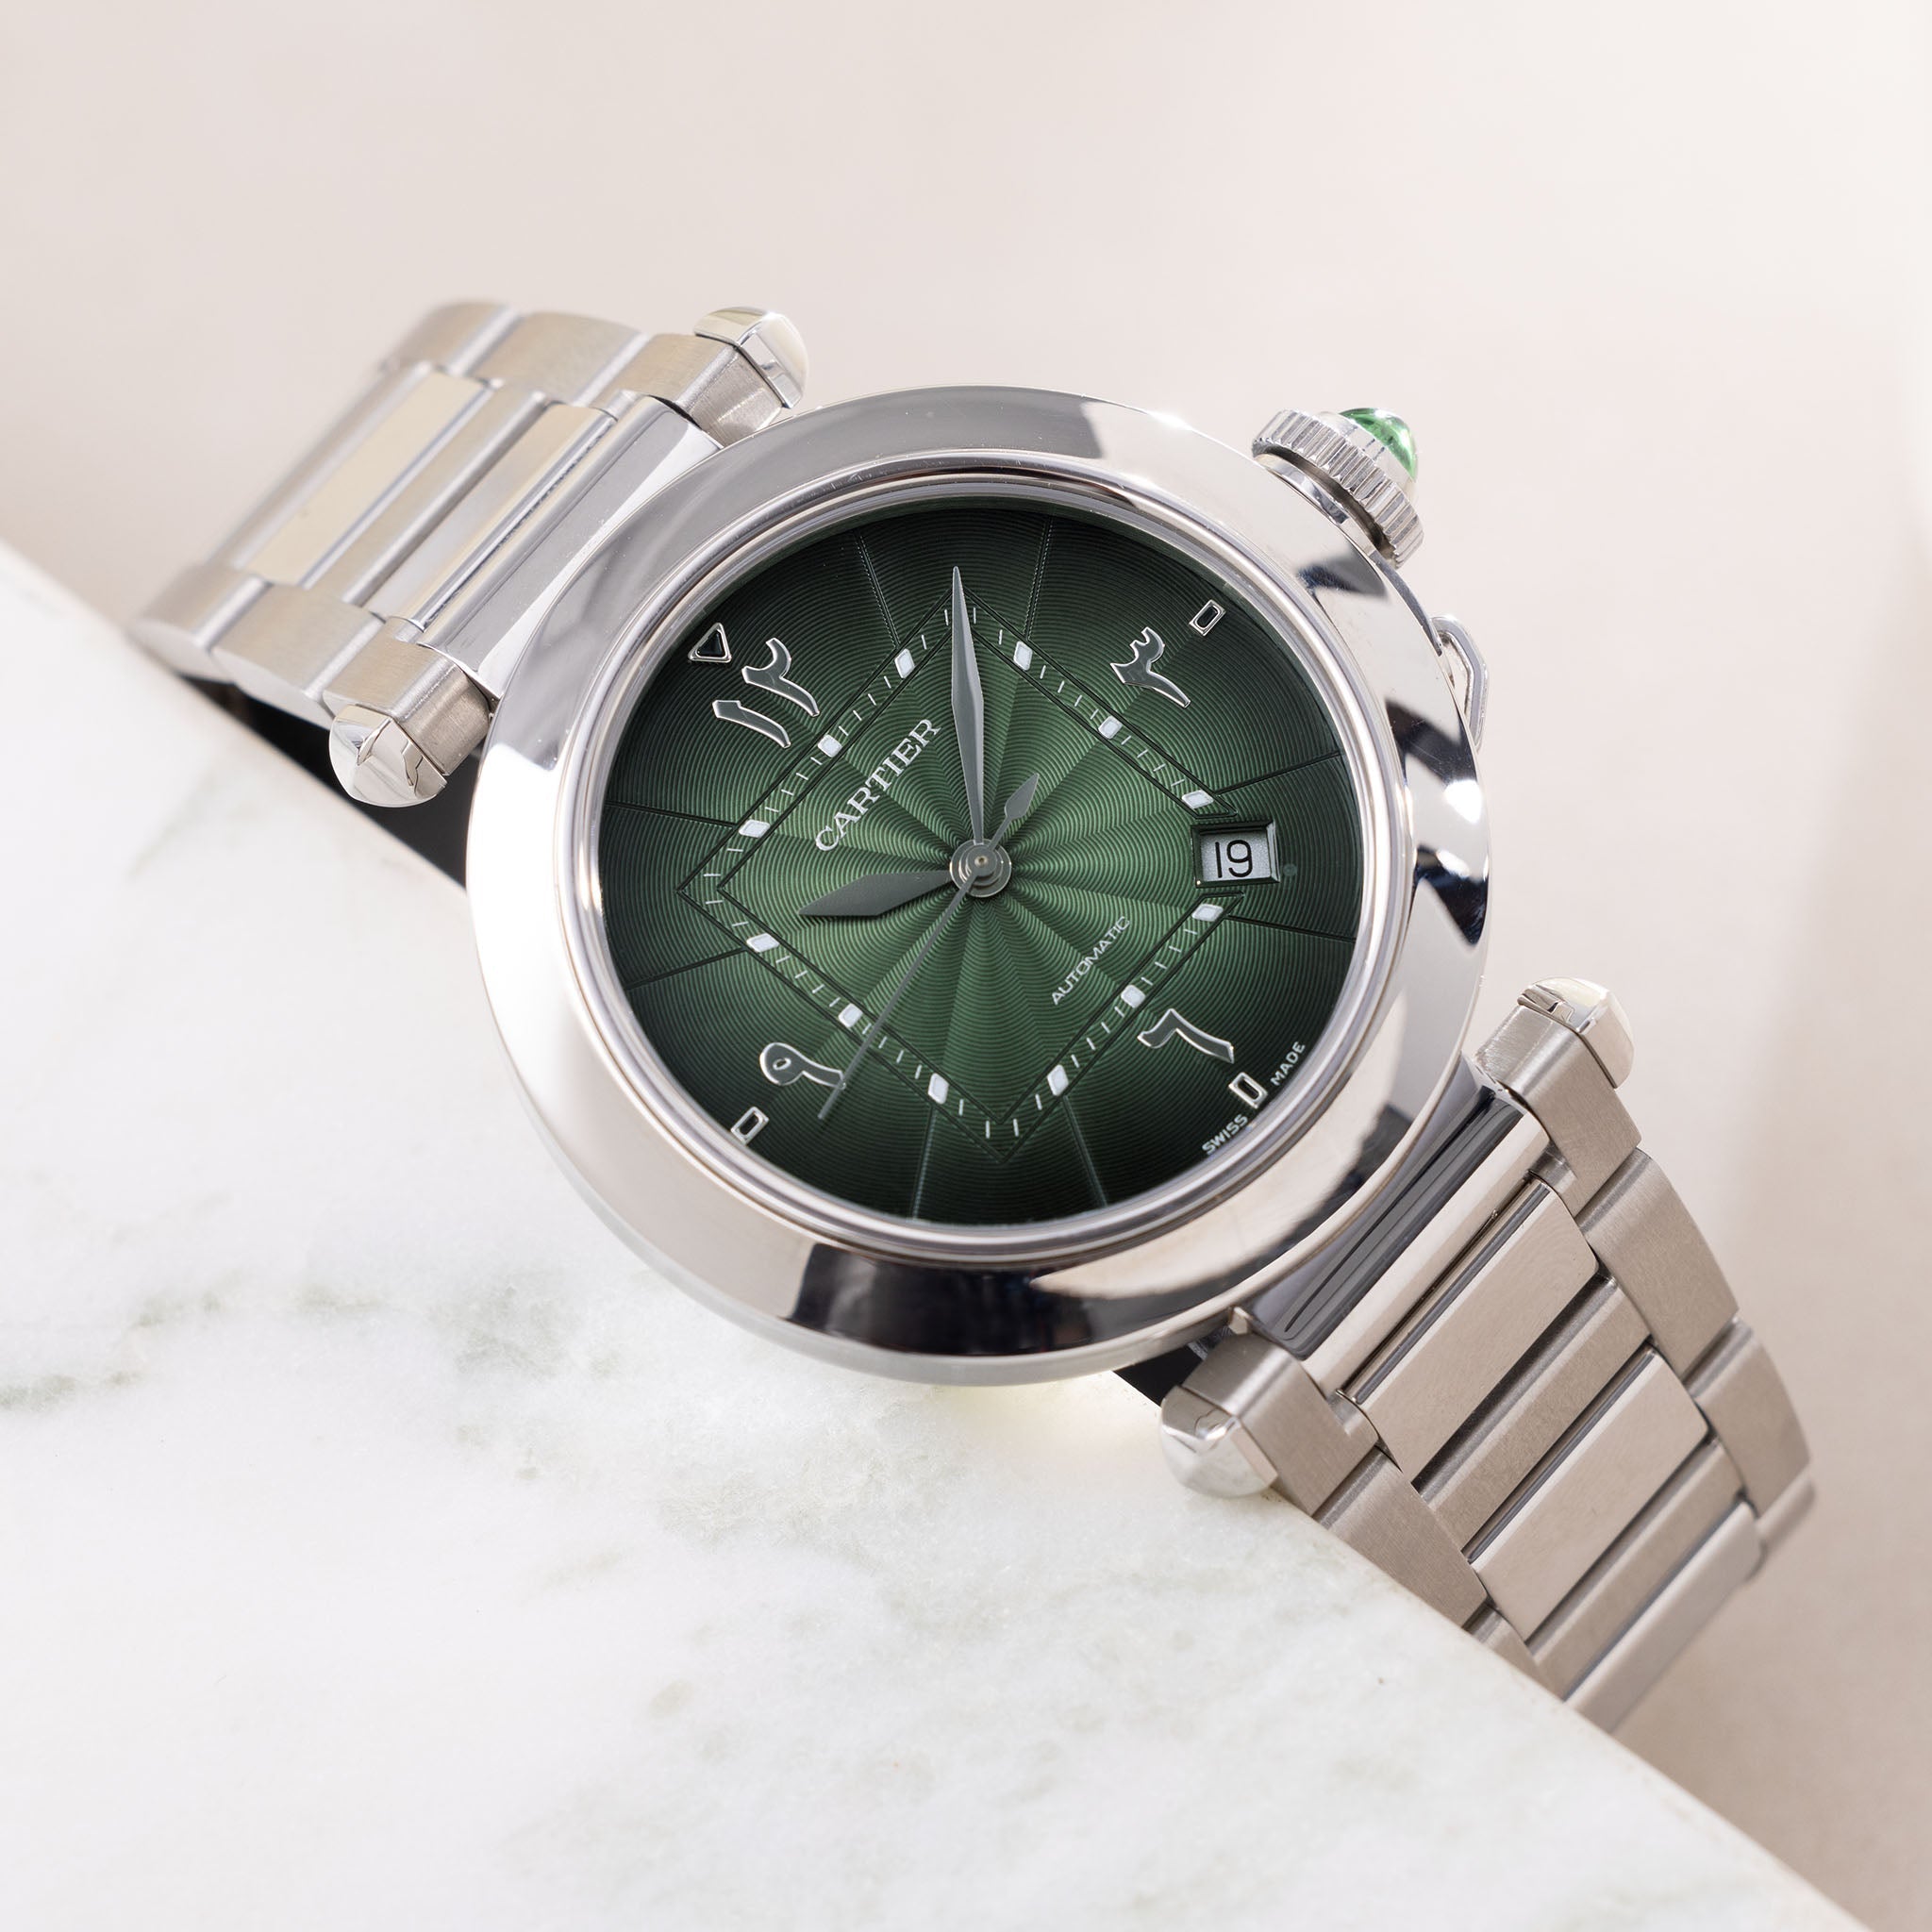 Cartier Pasha Green Middle East limited Edition with Warranty Card